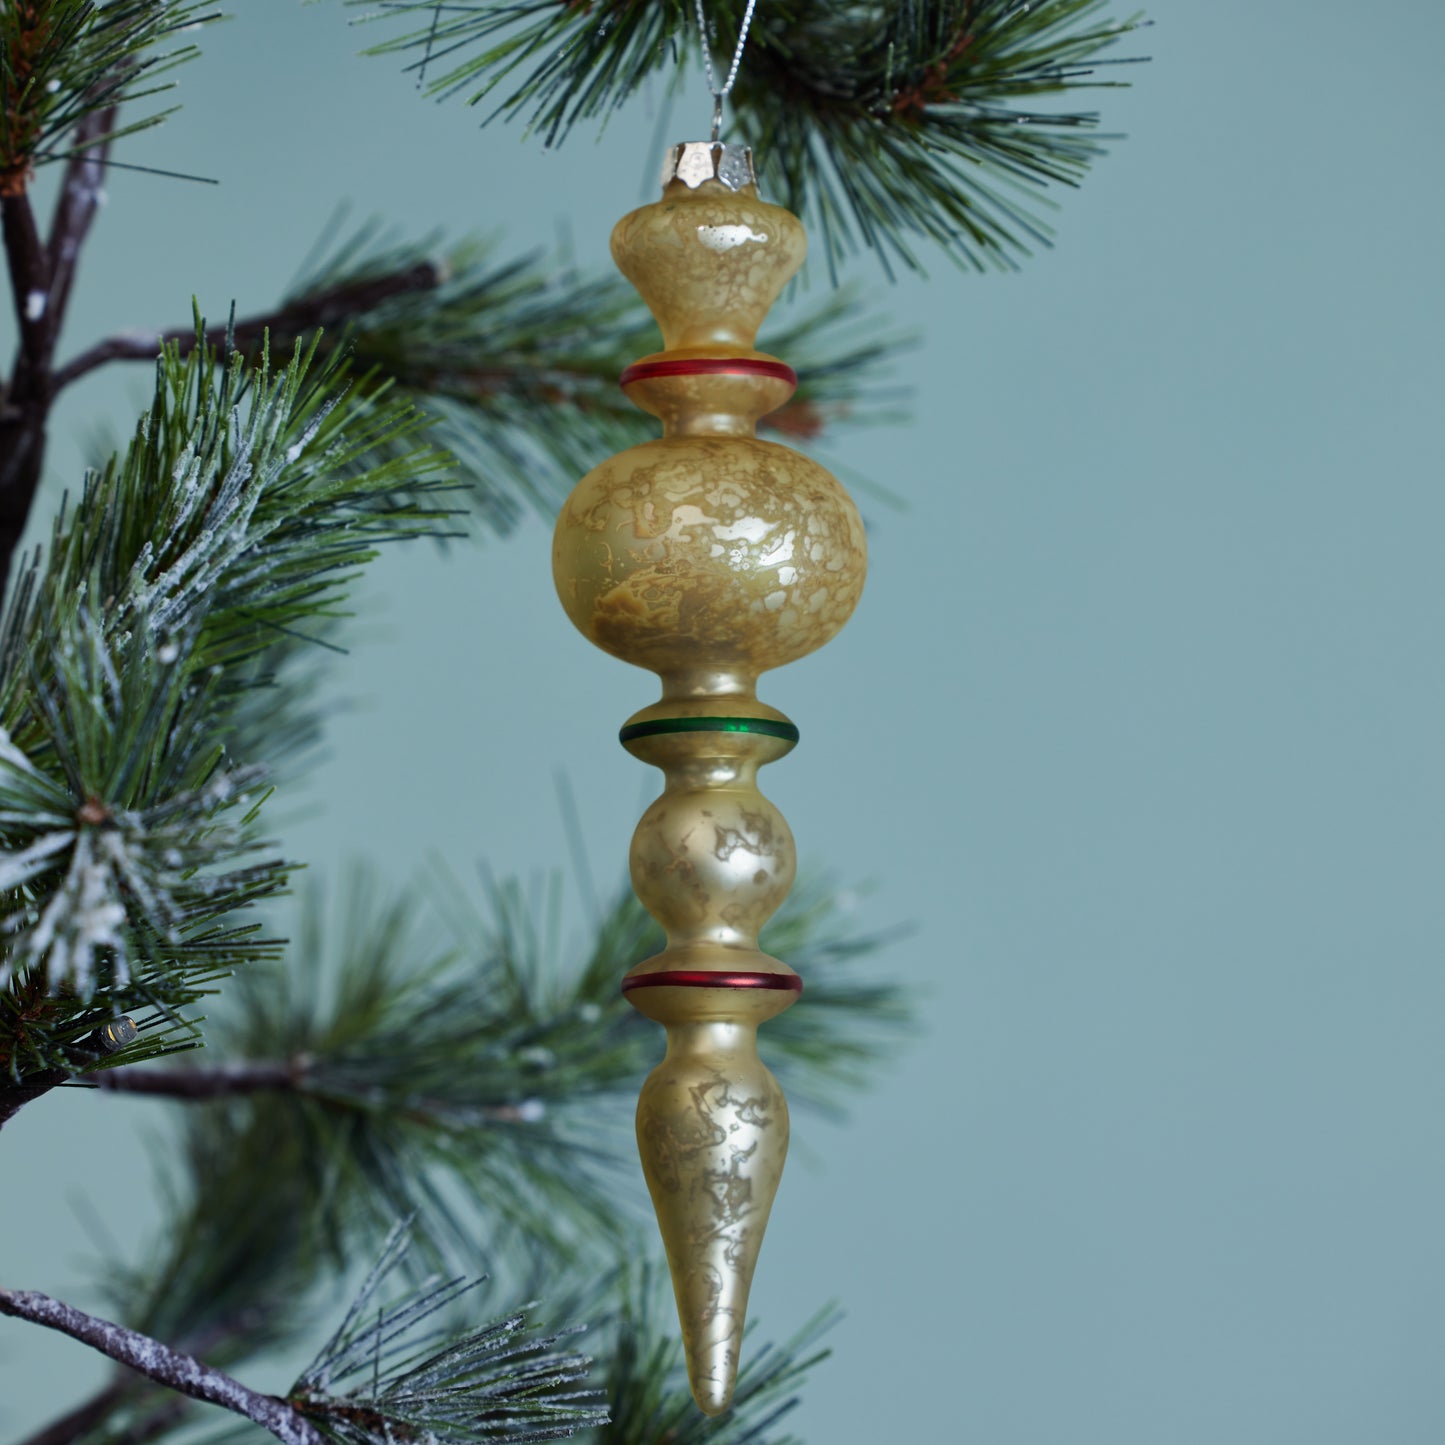 Hand-Painted Mercury Glass Finial Ornament